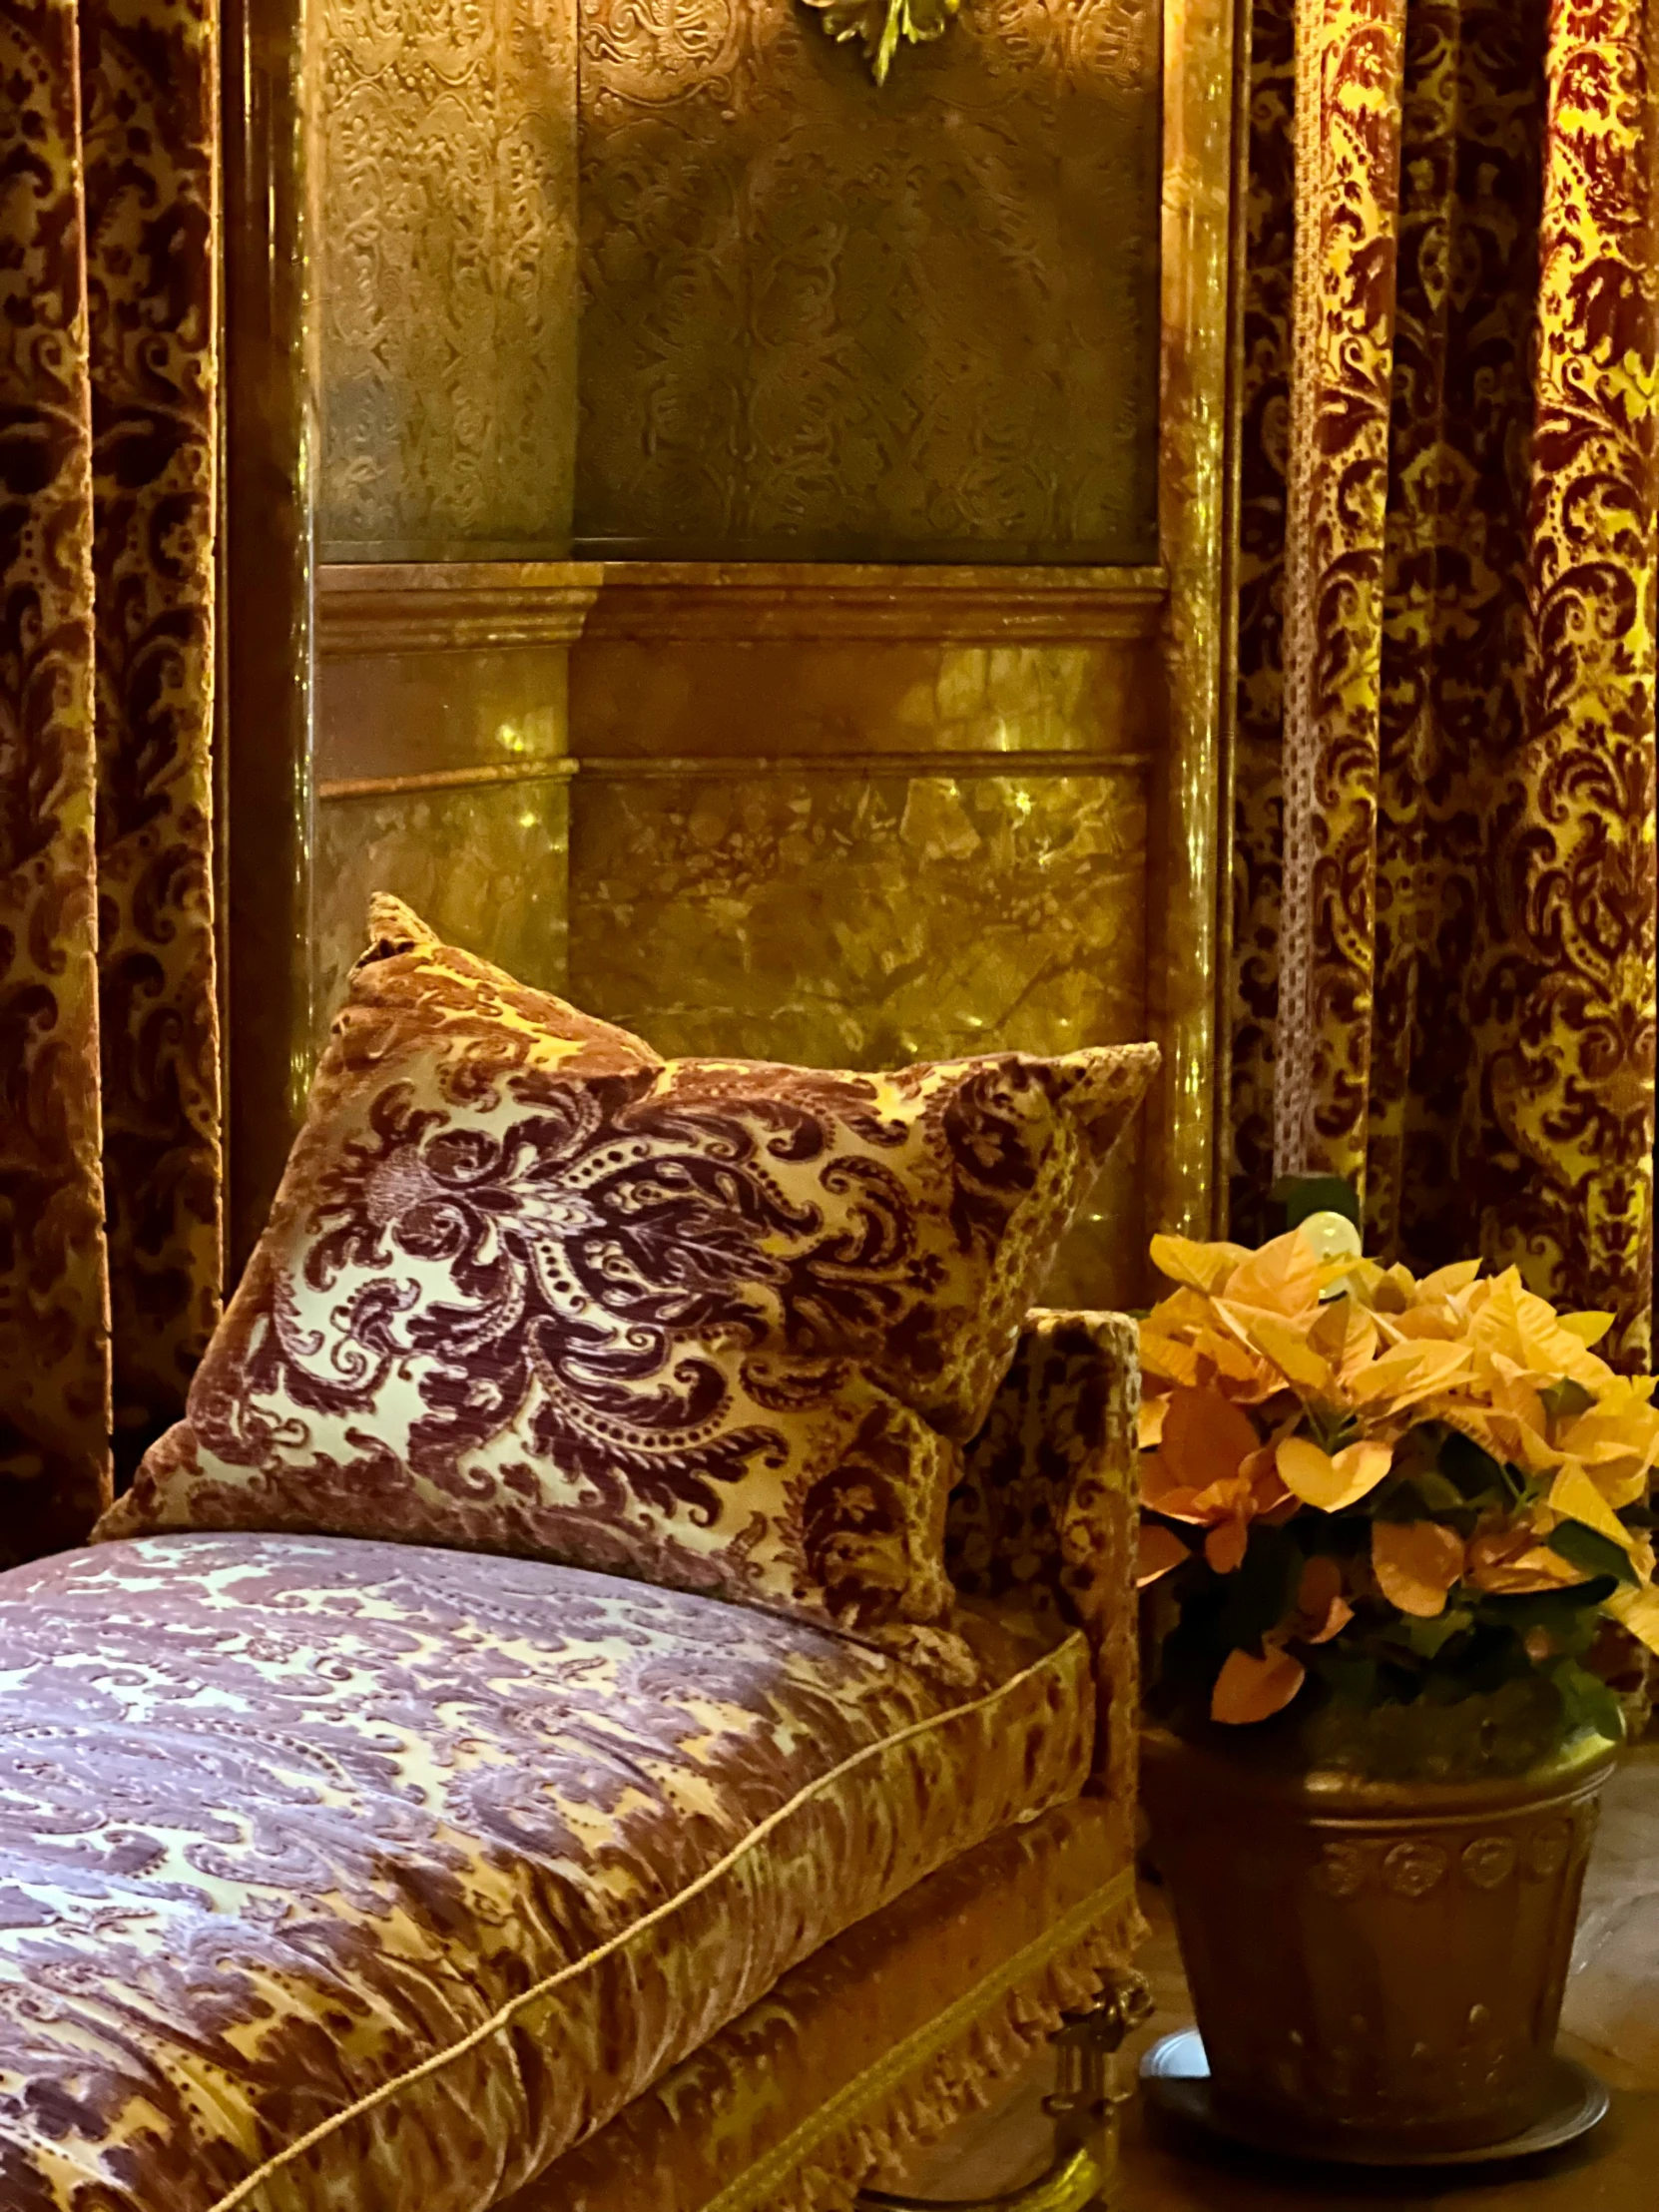 decorative furniture and pillows sitting on a table in front of a mirror